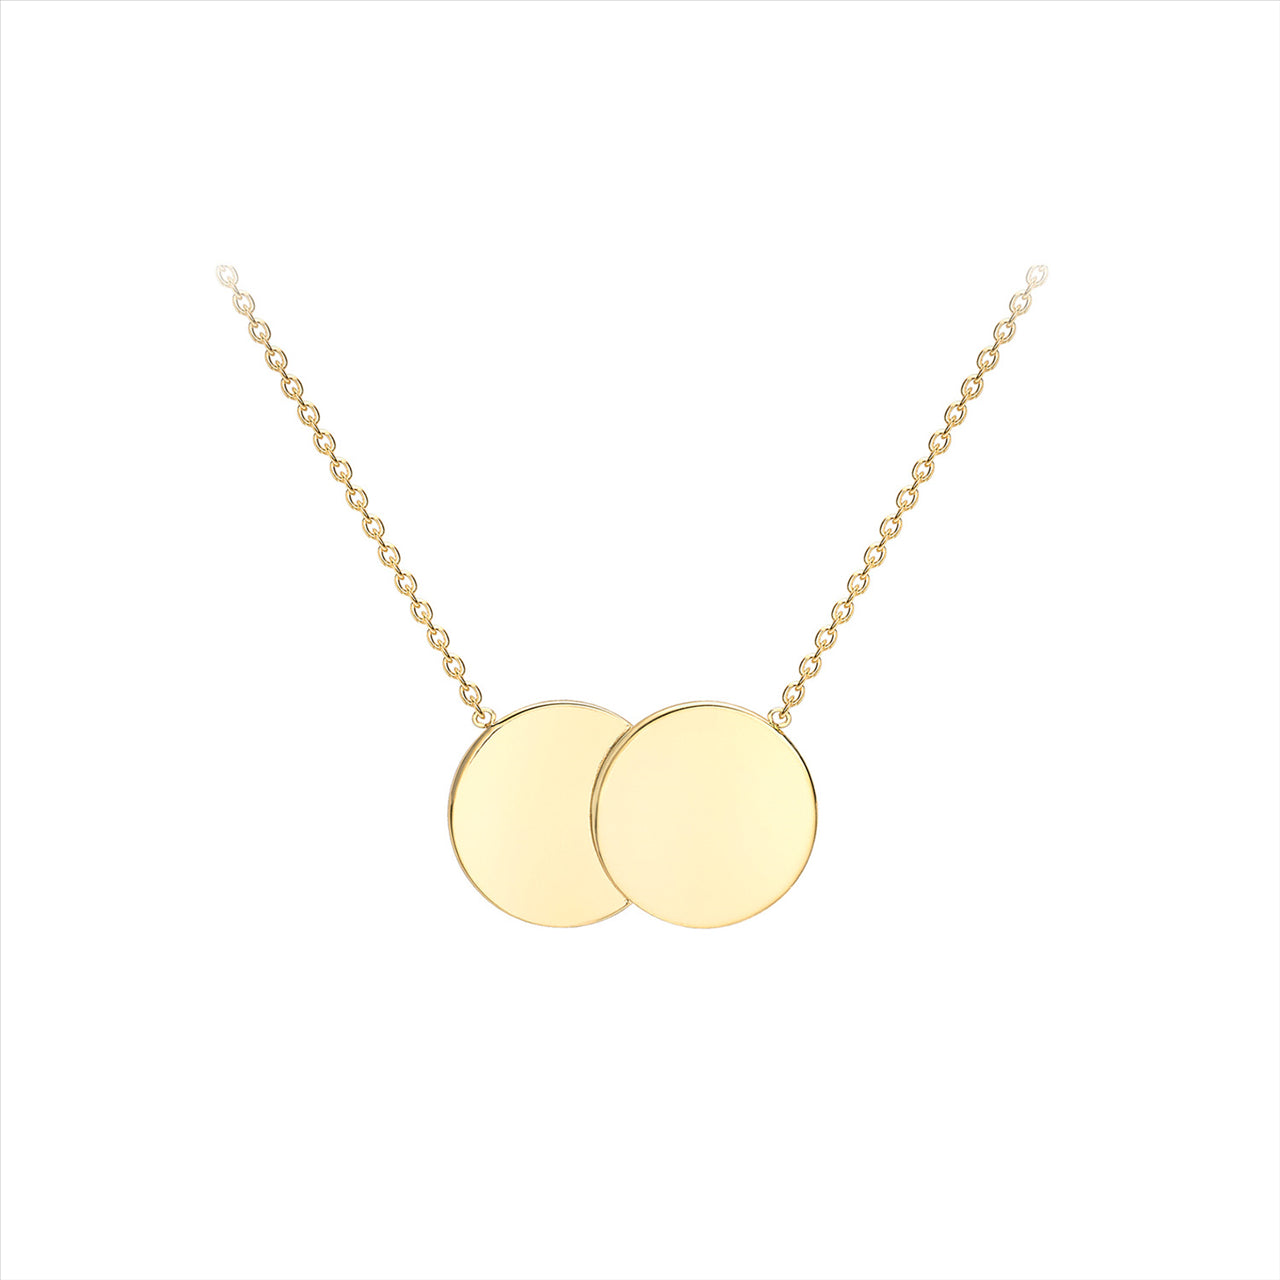 9K Yellow Gold 16.8mm x 10mm Double-Disc Adjustable Necklace 41cm-43cm